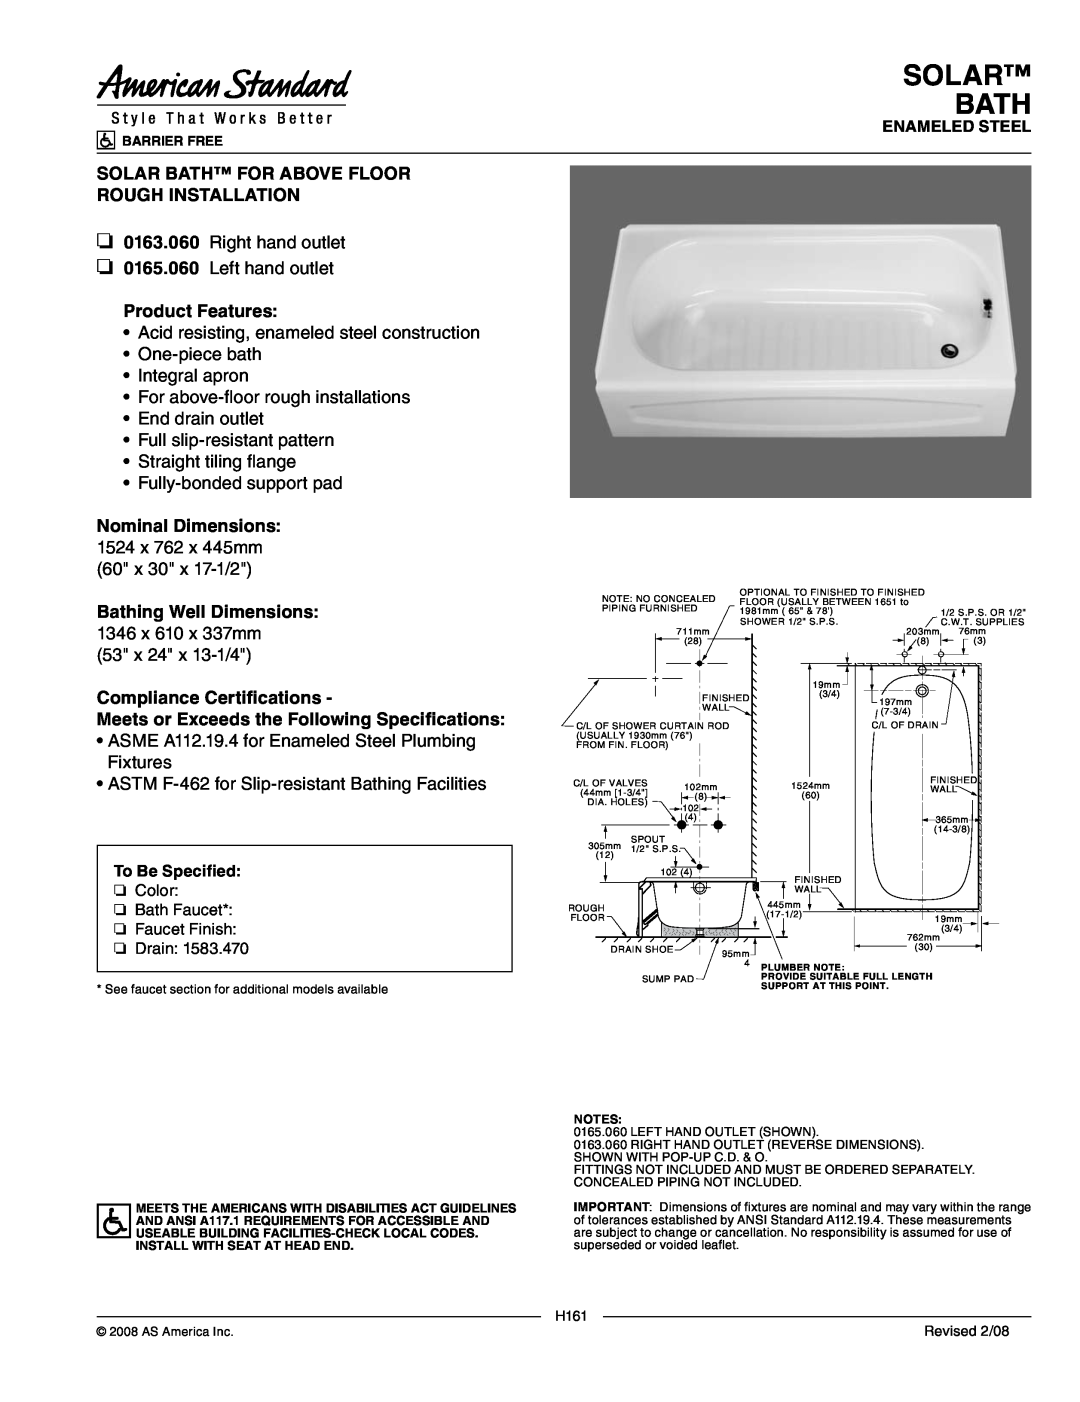 American Standard 0163.060 dimensions Solar Bath For Above Floor Rough Installation, Product Features, Enameled Steel 